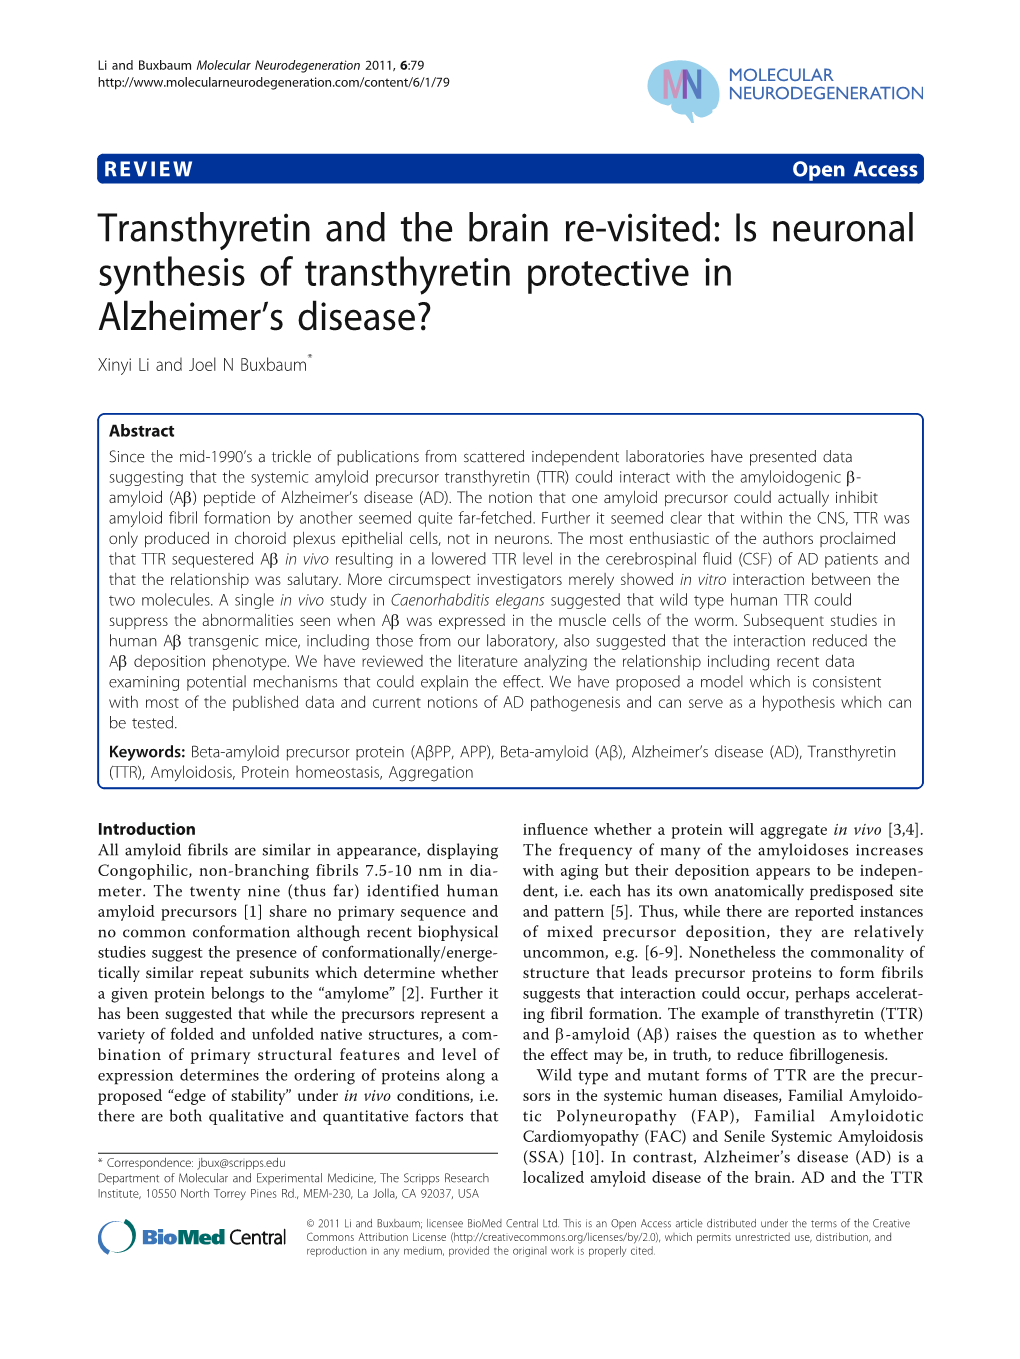 Transthyretin and the Brain Re-Visited: Is Neuronal Synthesis of Transthyretin Protective in Alzheimer’S Disease? Xinyi Li and Joel N Buxbaum*